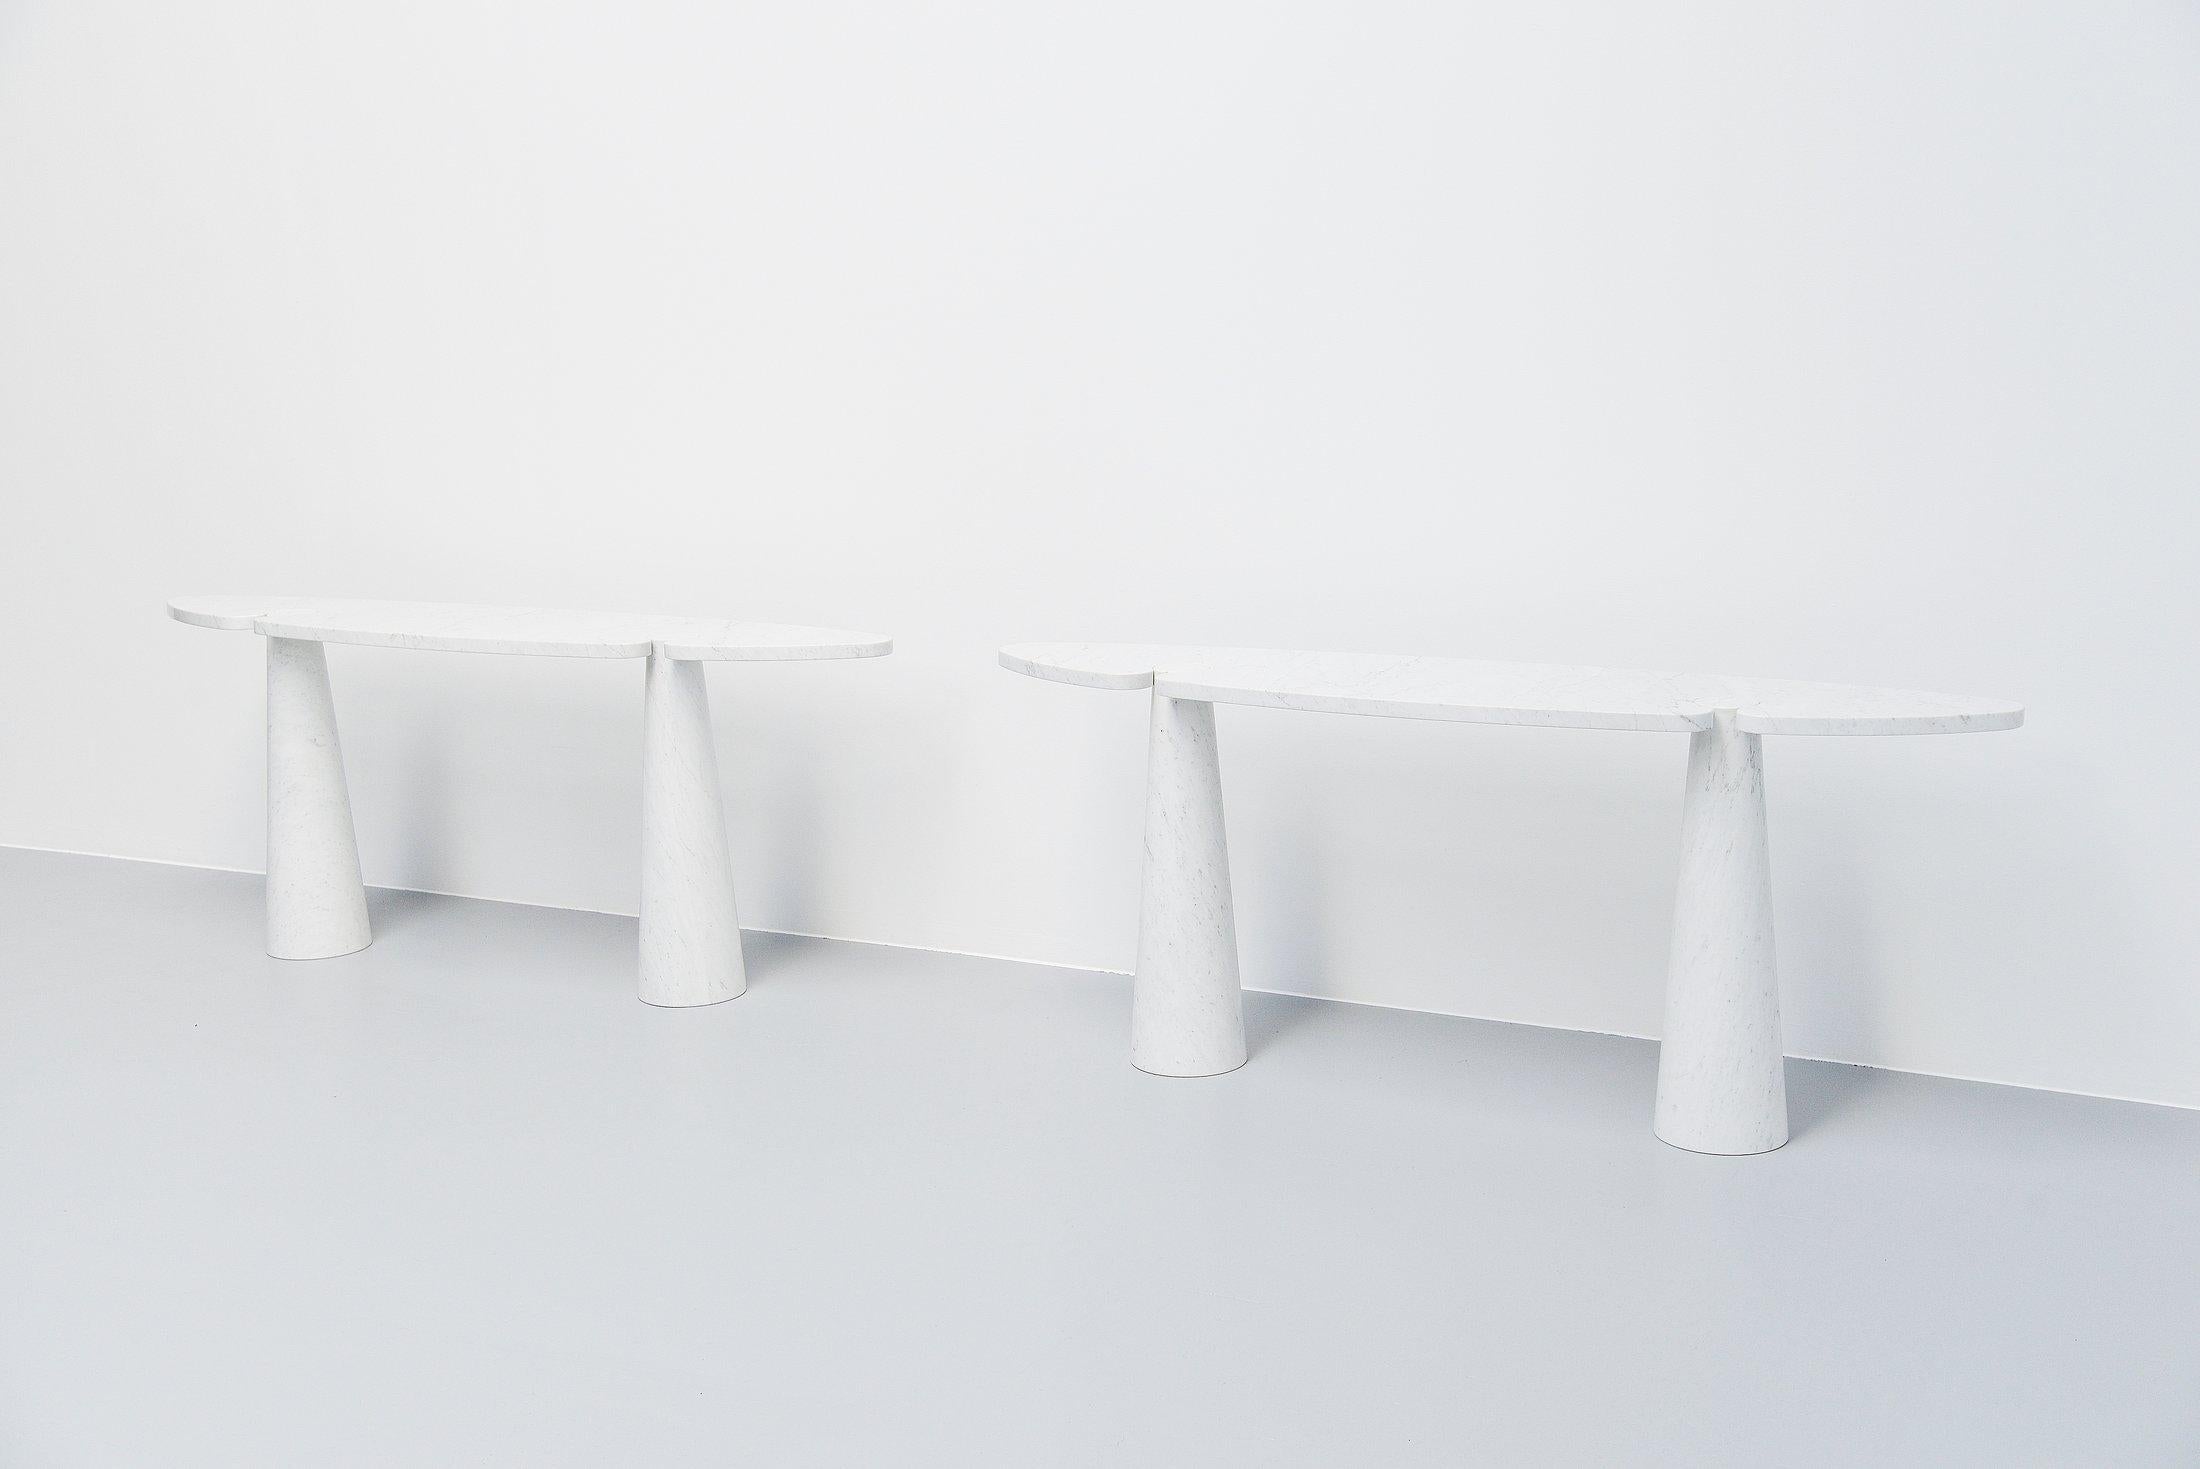 Spectacular ‘Eros’ console table pair designed by Angelo Mangiarotti and manufactured by Skipper, Italy 1971. This console tables are made of white Carrara marble and have beautiful grey veins in the white marble. The console tables come from the